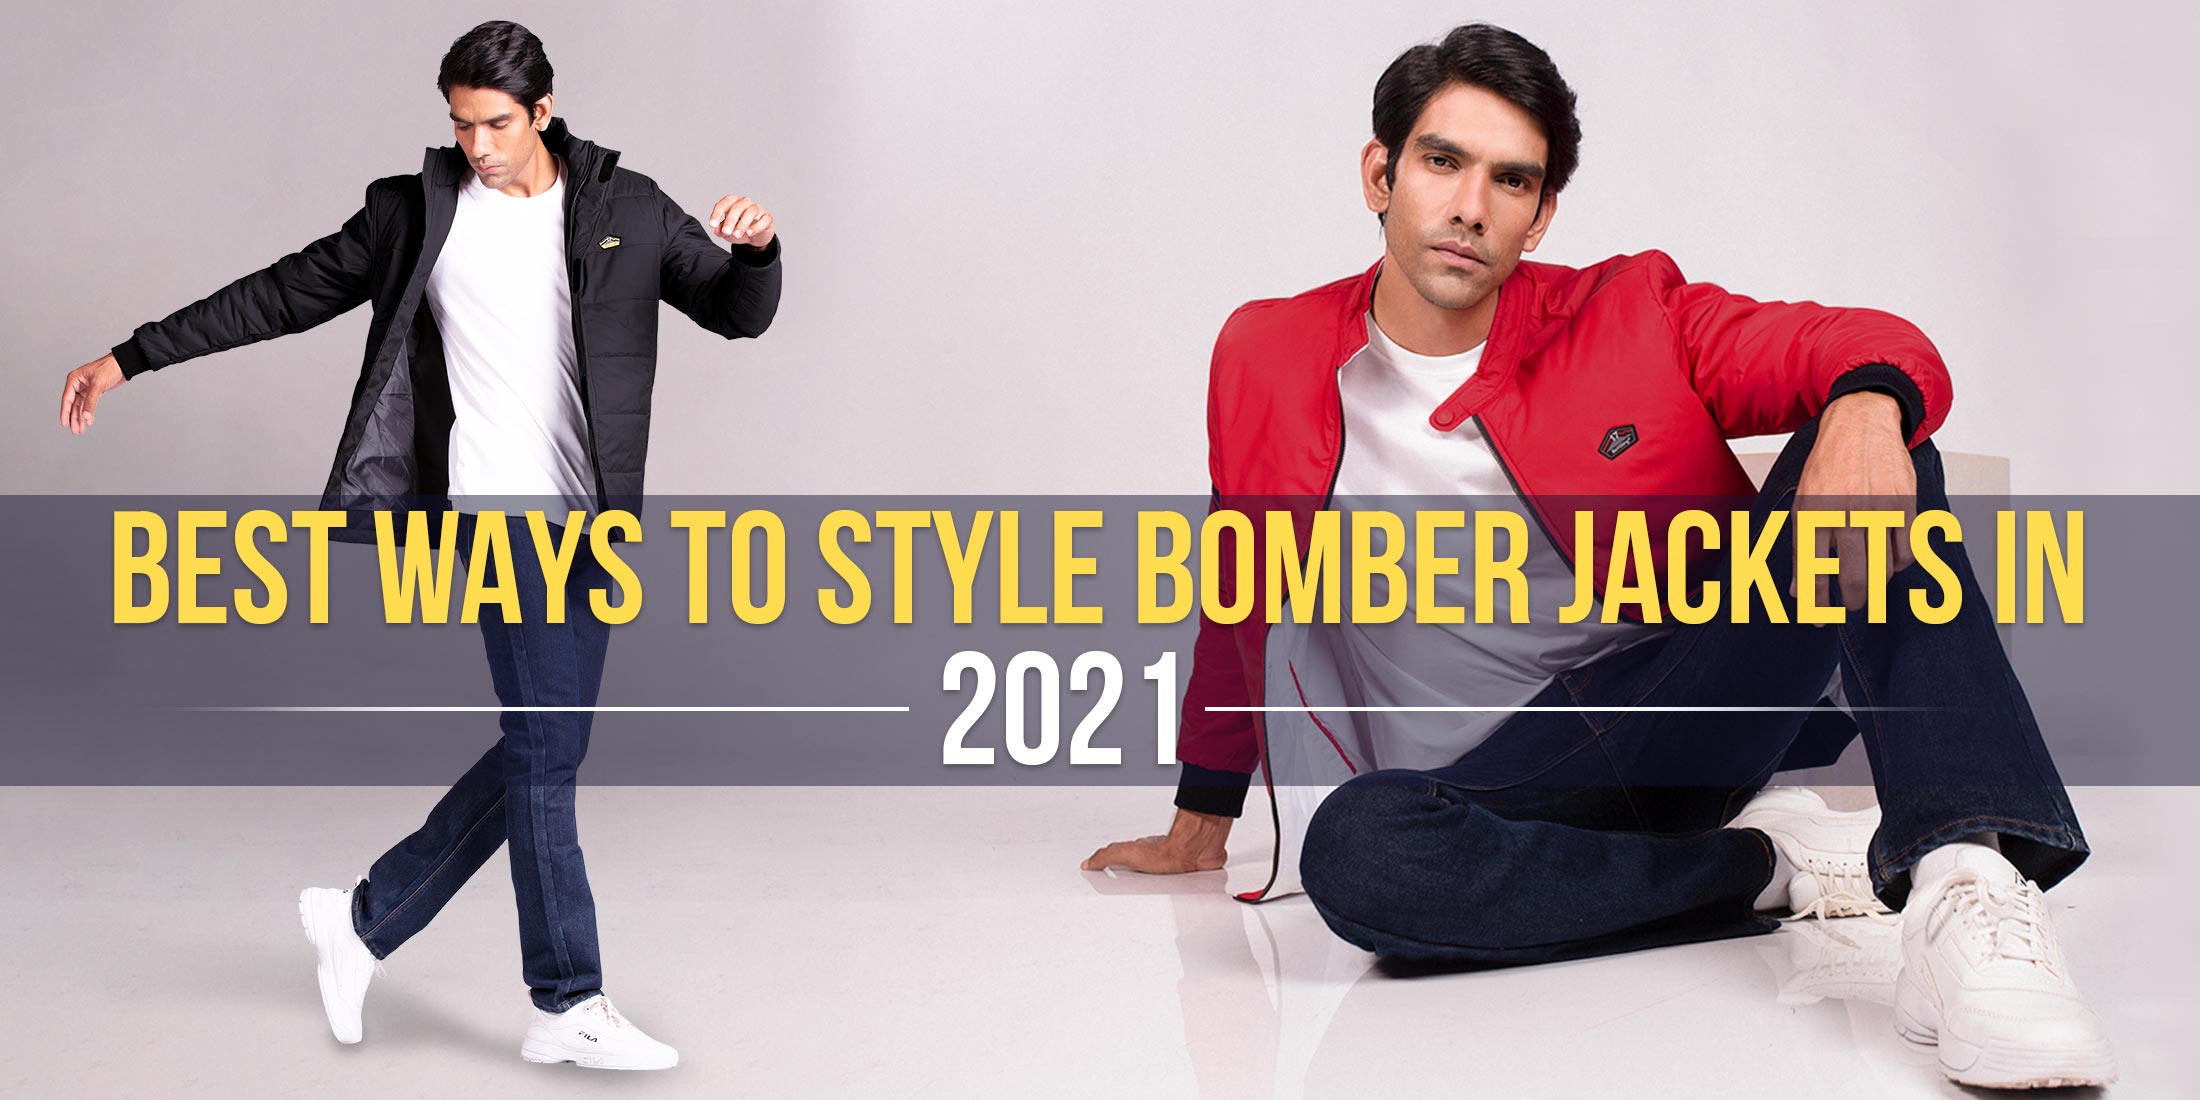 5 Bomber-Jacket Outfits That Are On-Trend for 2023